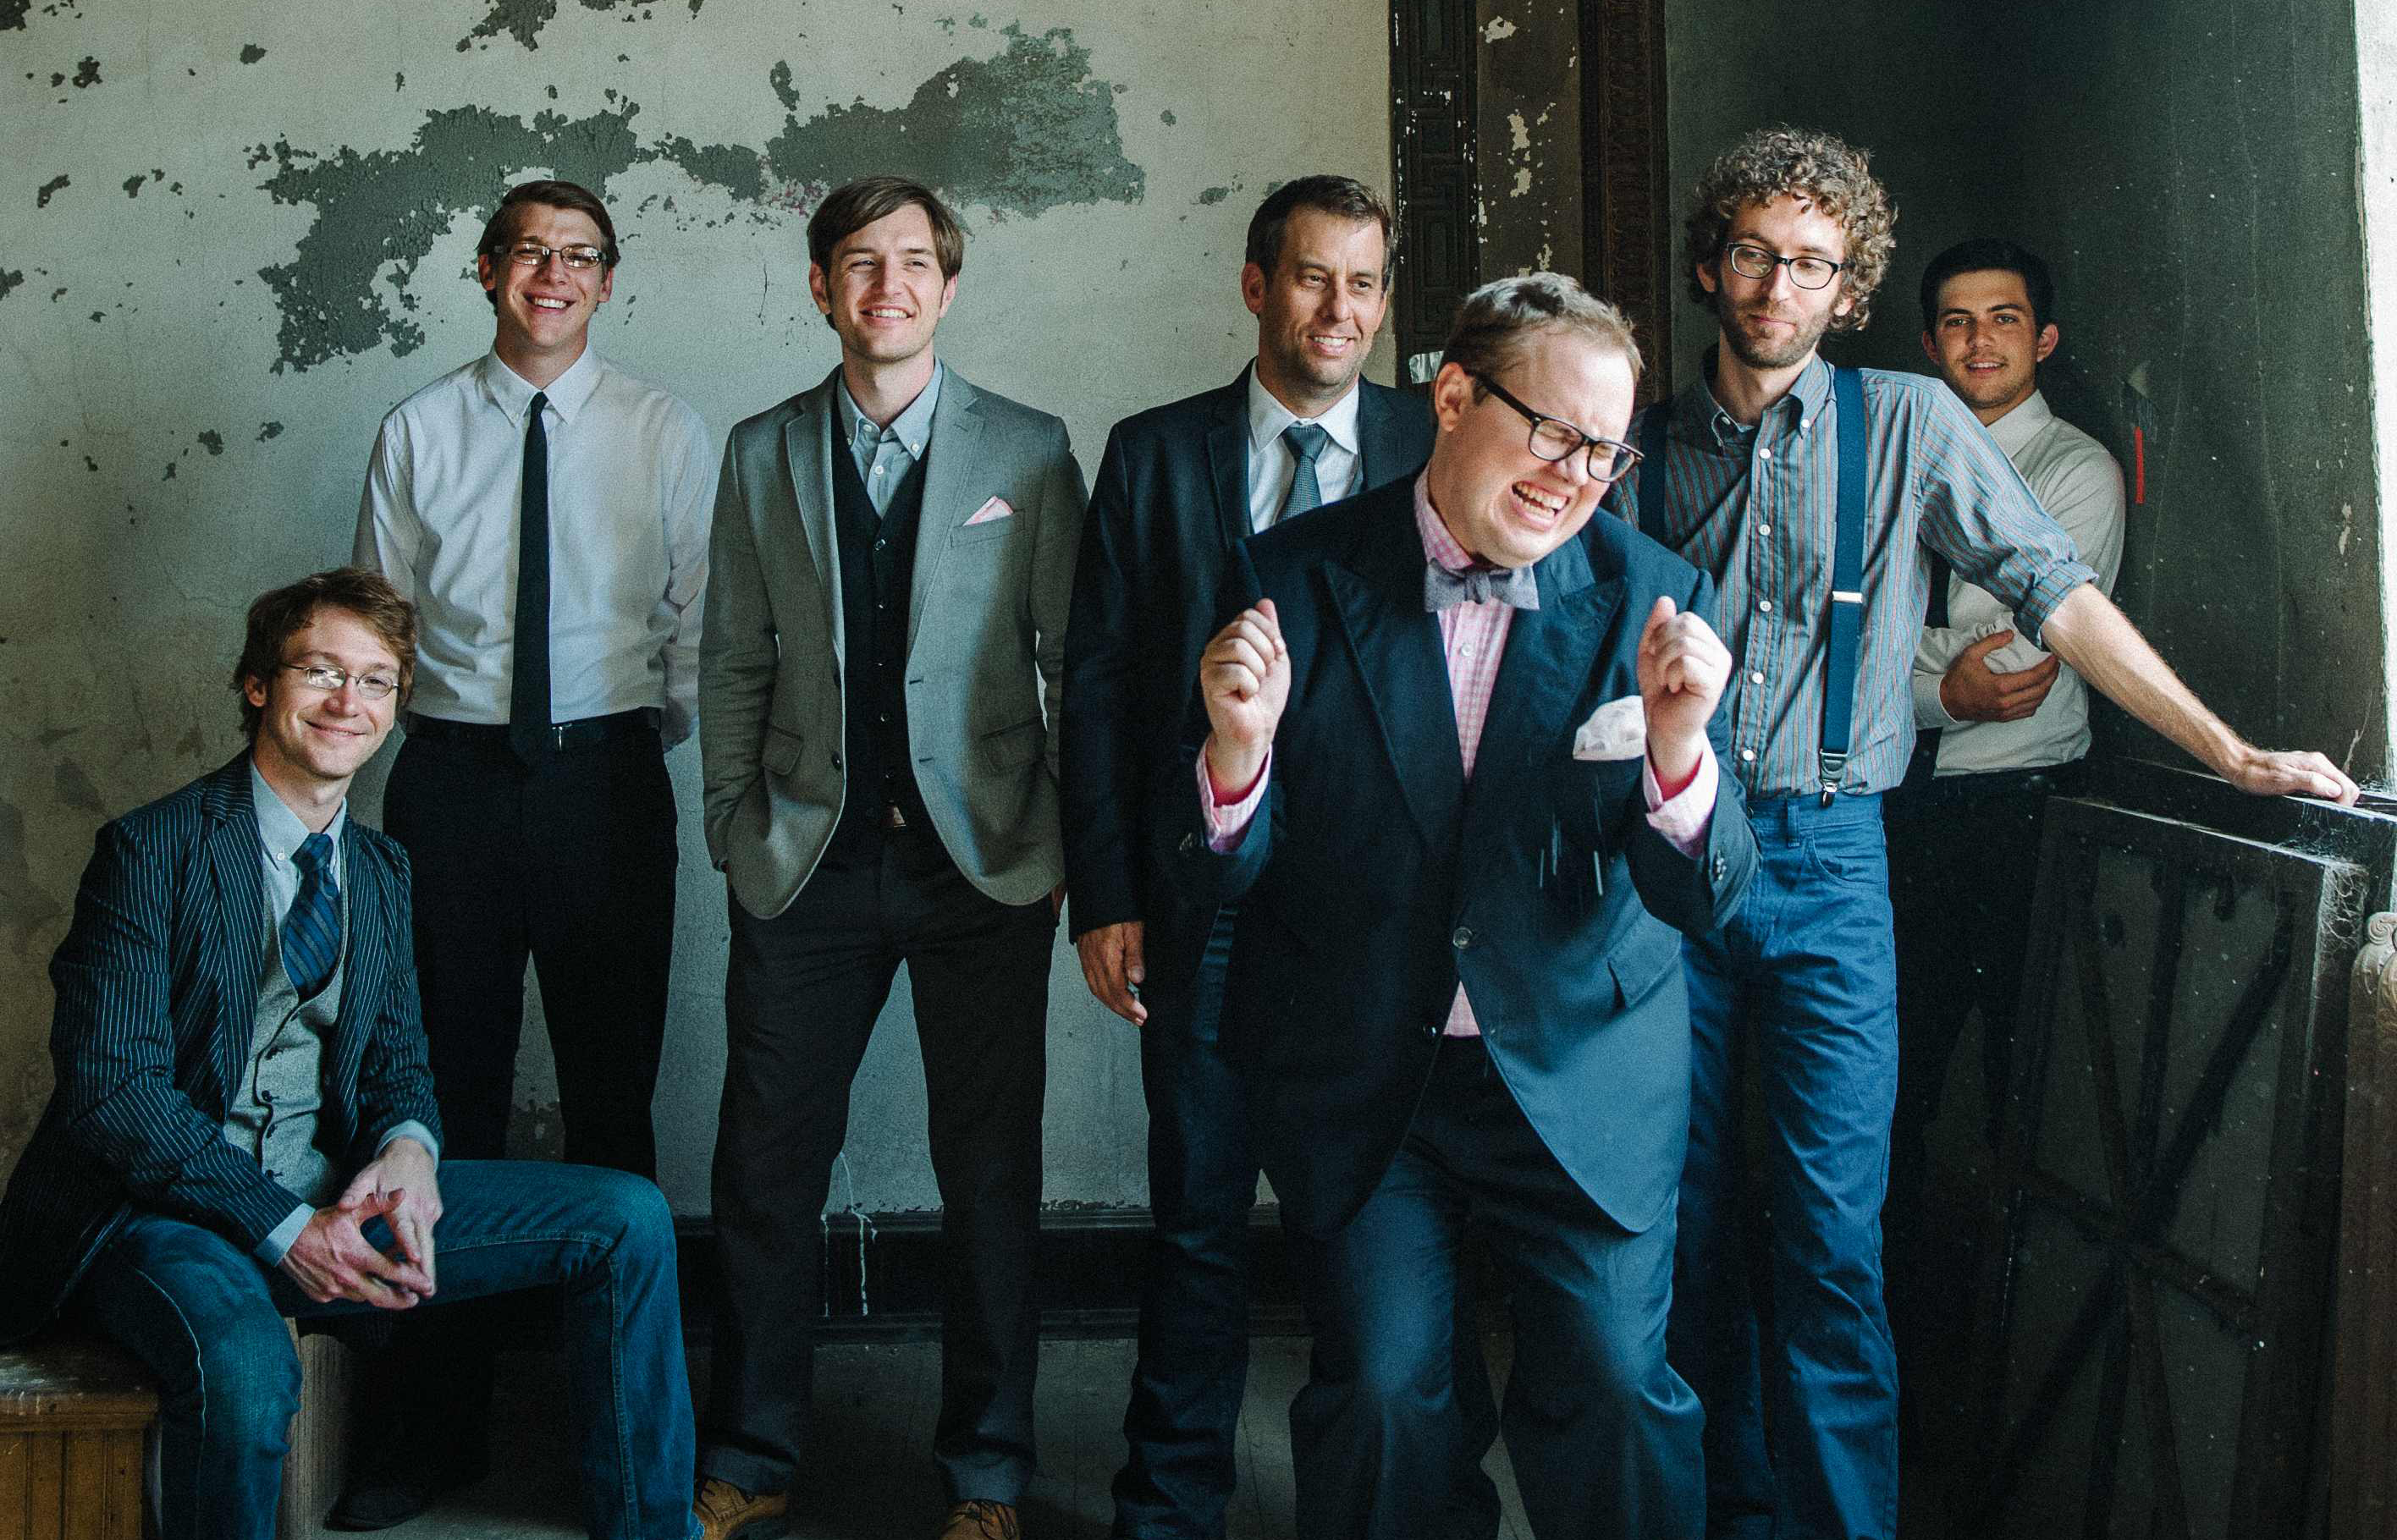 St. Paul and The Broken Bones will perform during the Art of Wine event on July 19. (Submitted photo)